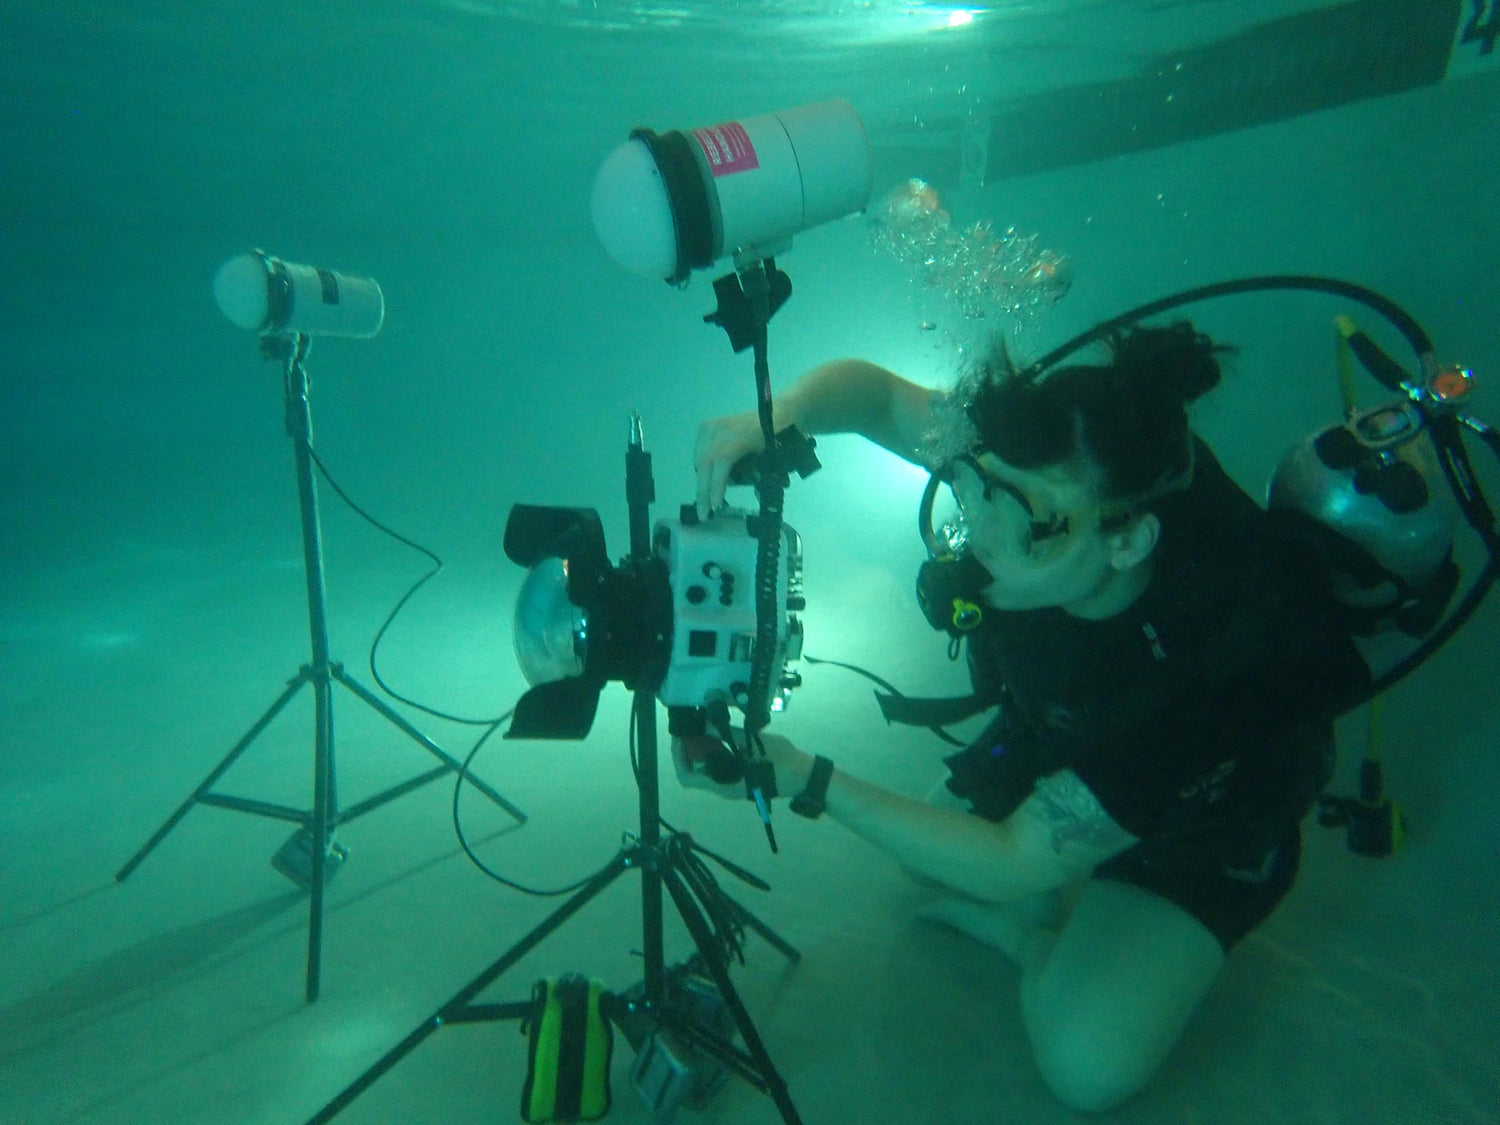 Behind the Scenes of an Underwater Editorial Photo Shoot